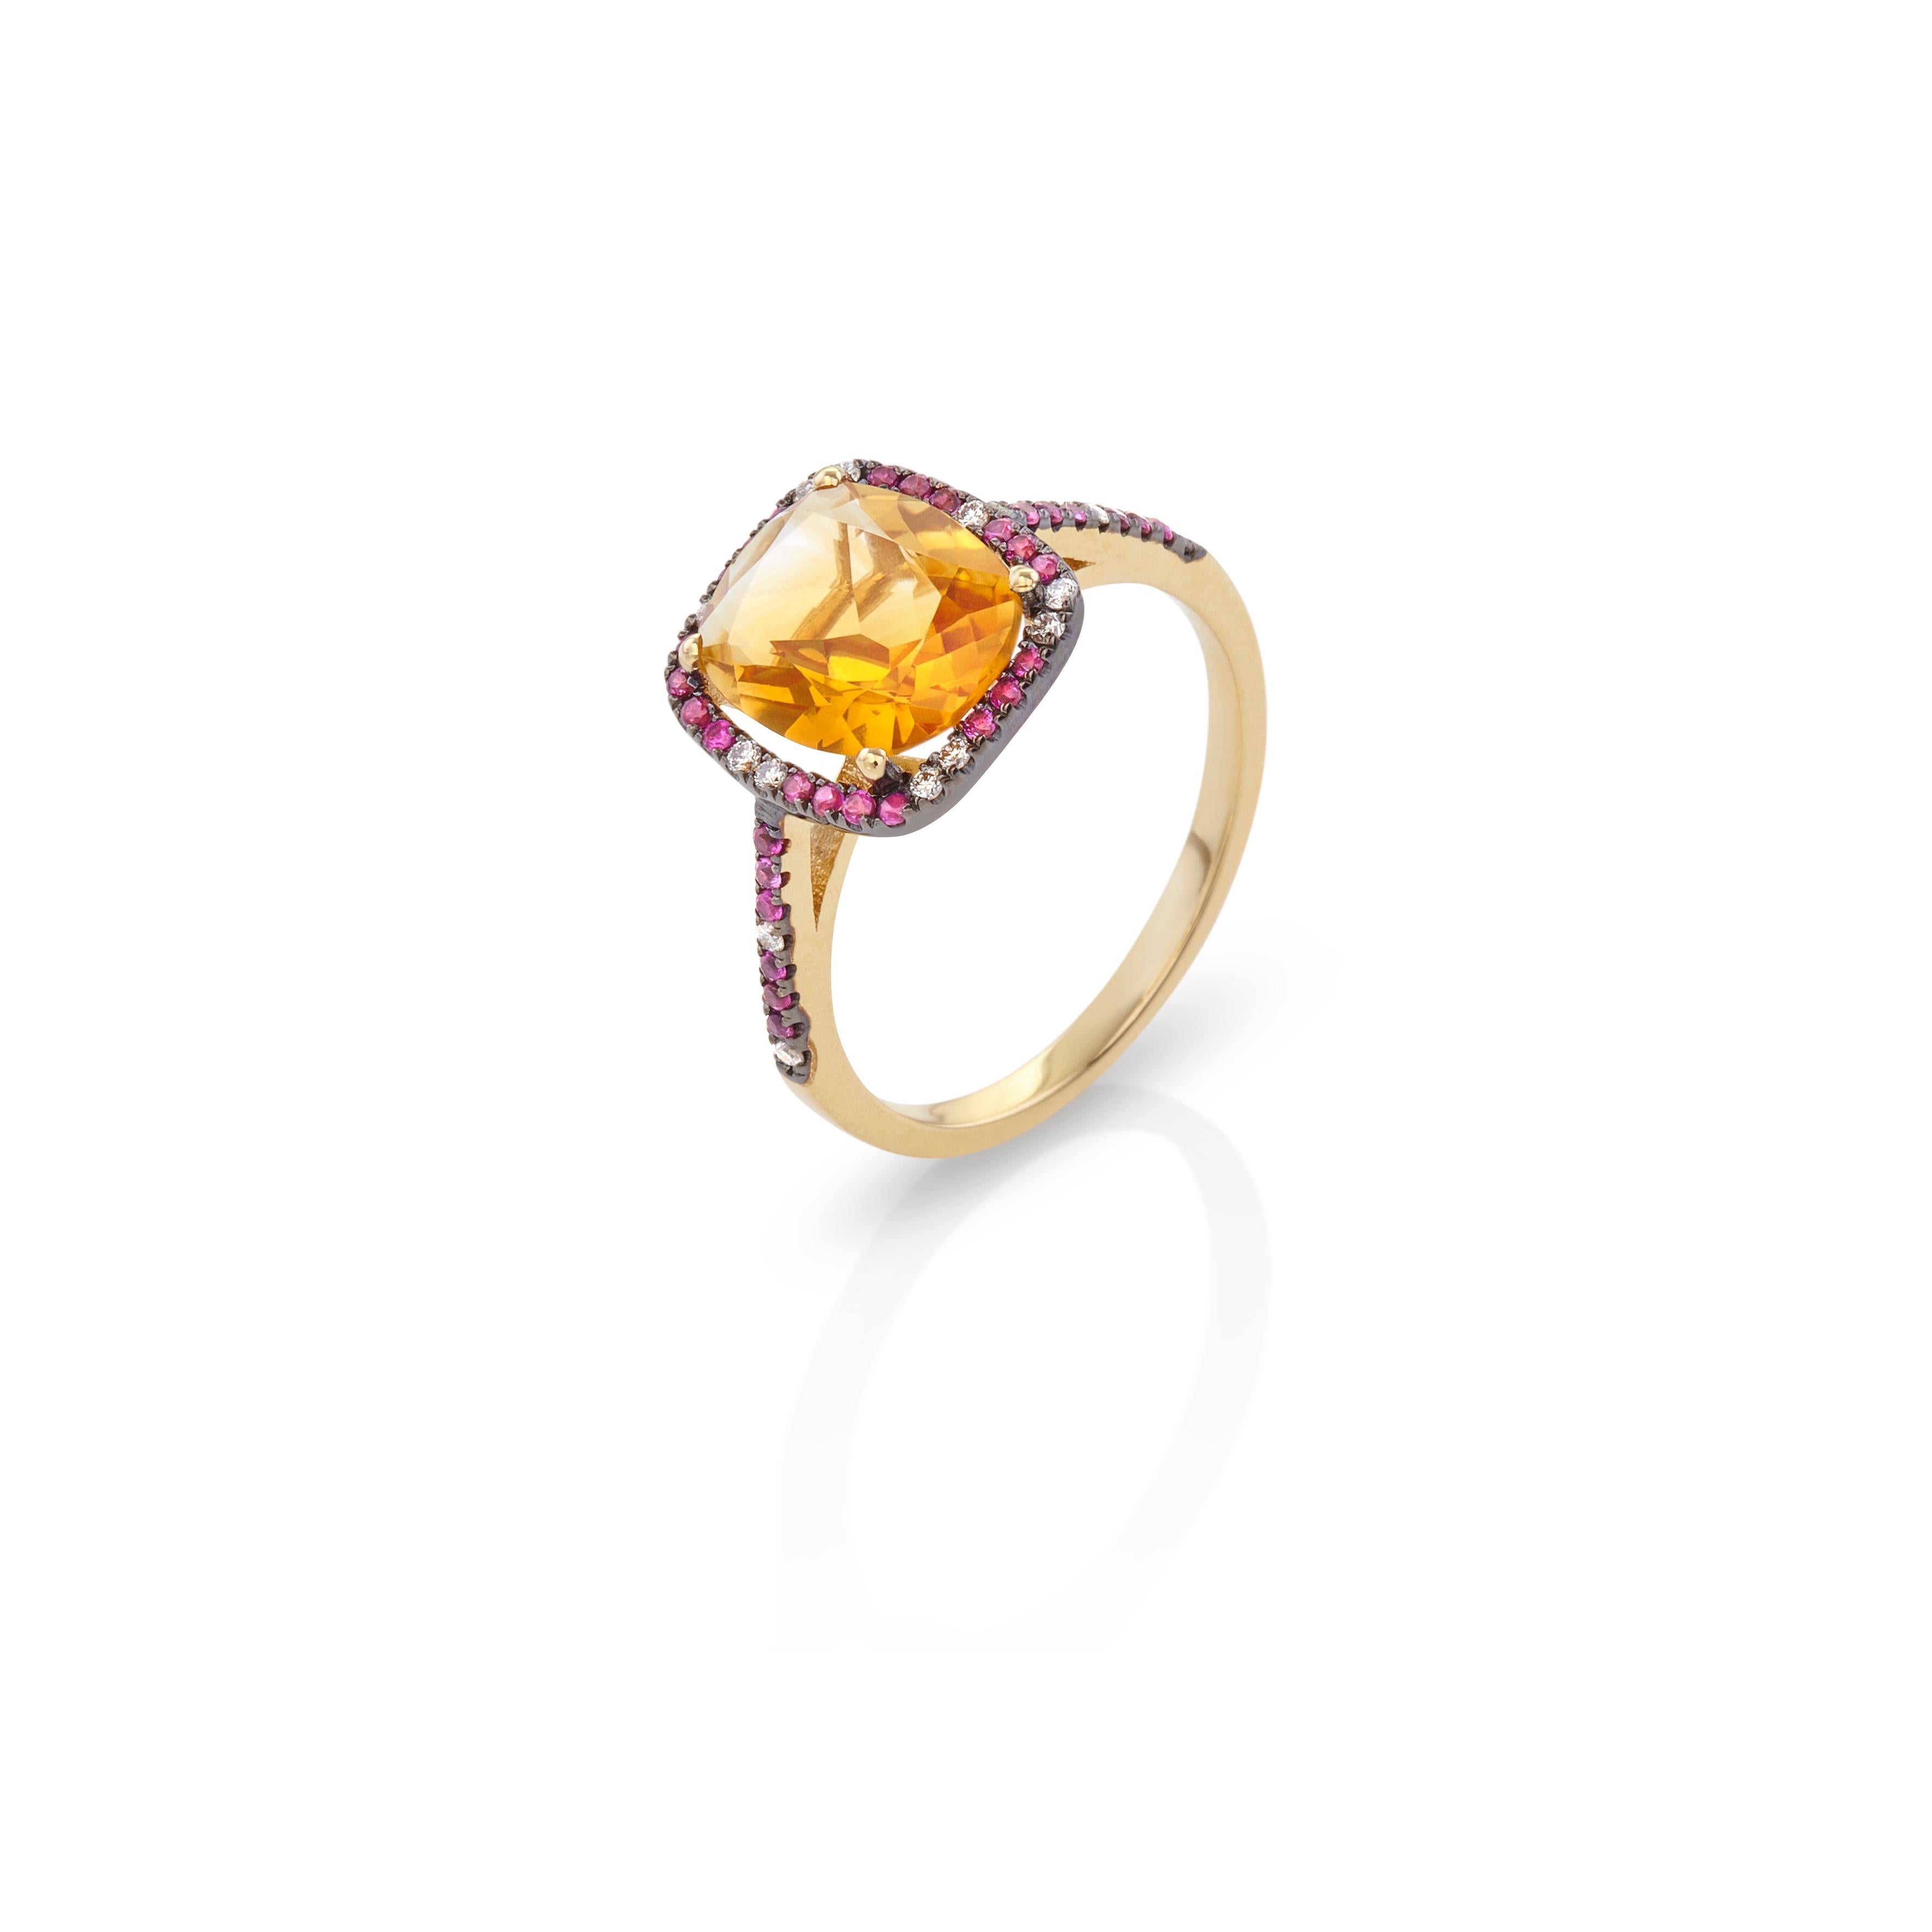 For Sale:  Colorful Flush Ring in 18kt Yellow Gold with Citrine Pink Sapphires and Diamonds 3